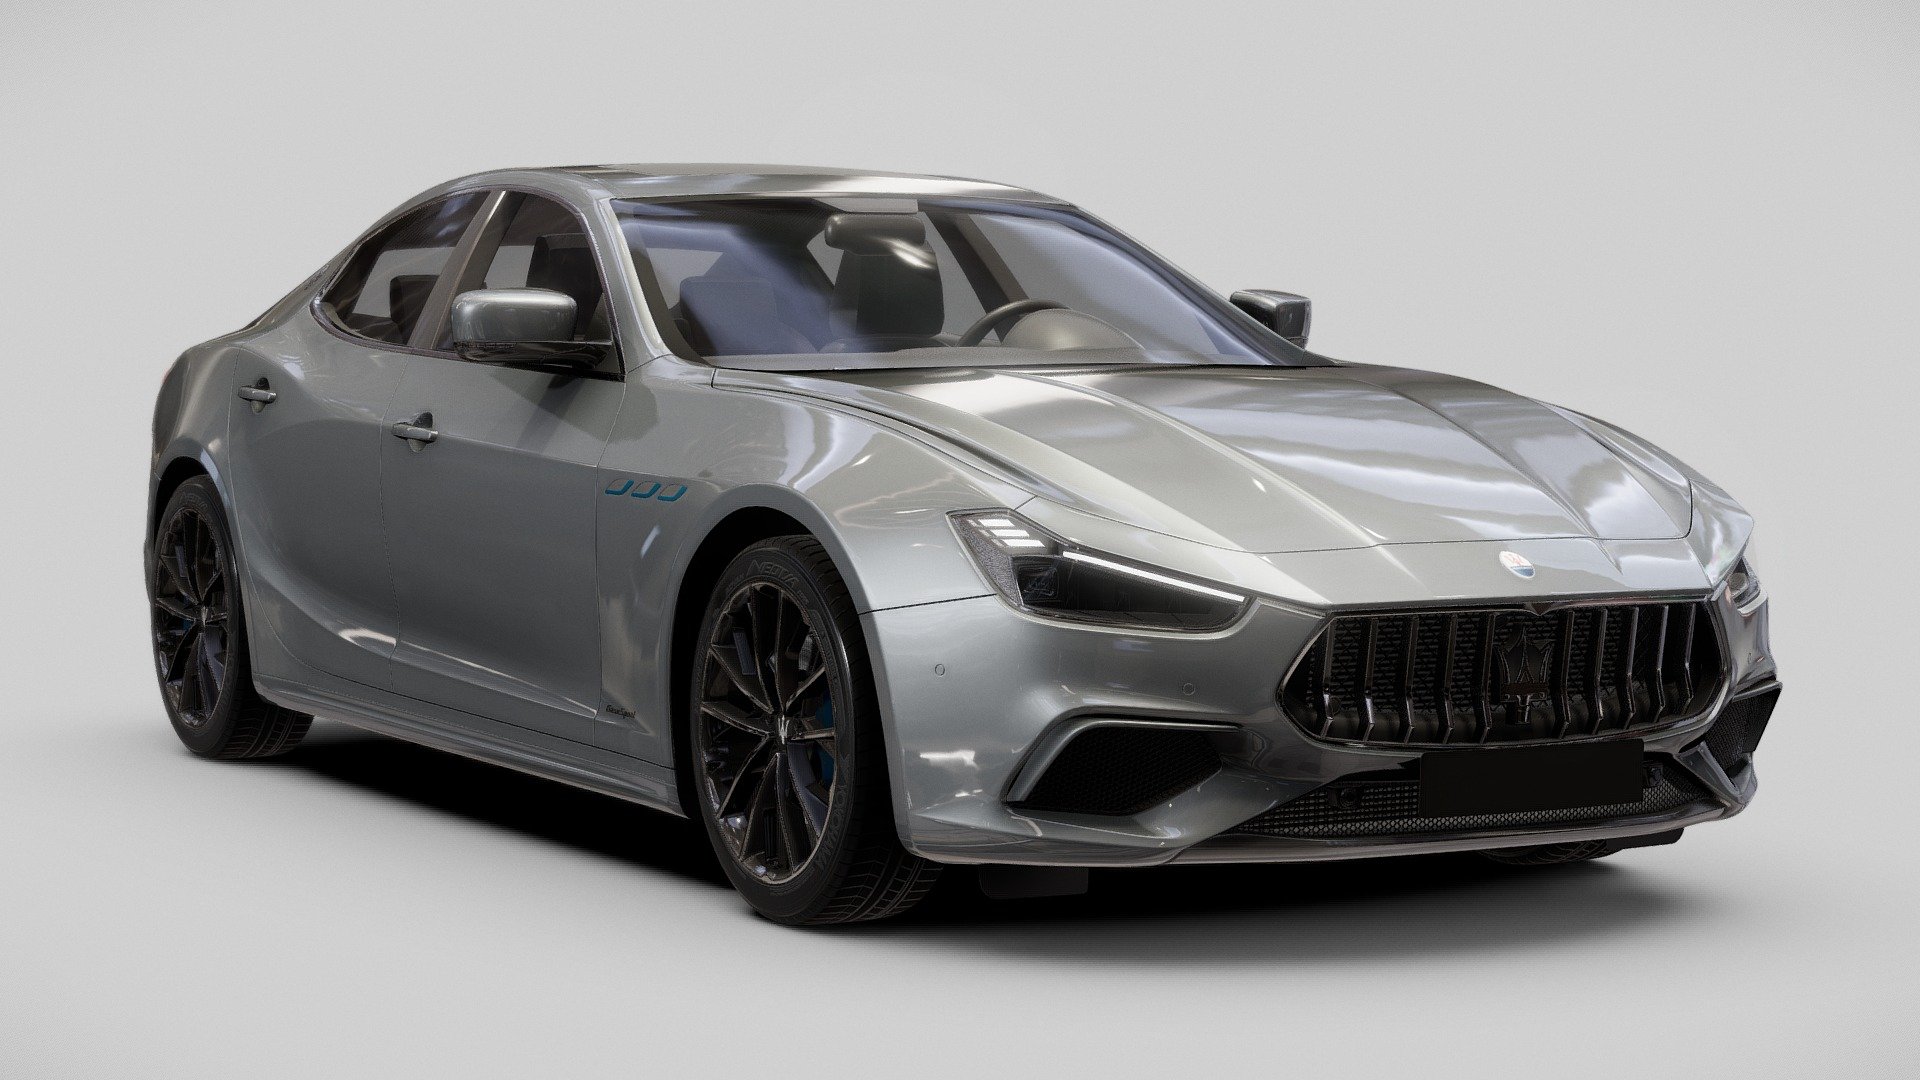 please please please first like it then u r free to download it 

2nd free car to celebrate nothing :/

enjoy

Also u can follow my instagram

ZIRODESIGN - Maserati Ghibli hybrid - Download Free 3D model by ZIRODESIGN 3d model